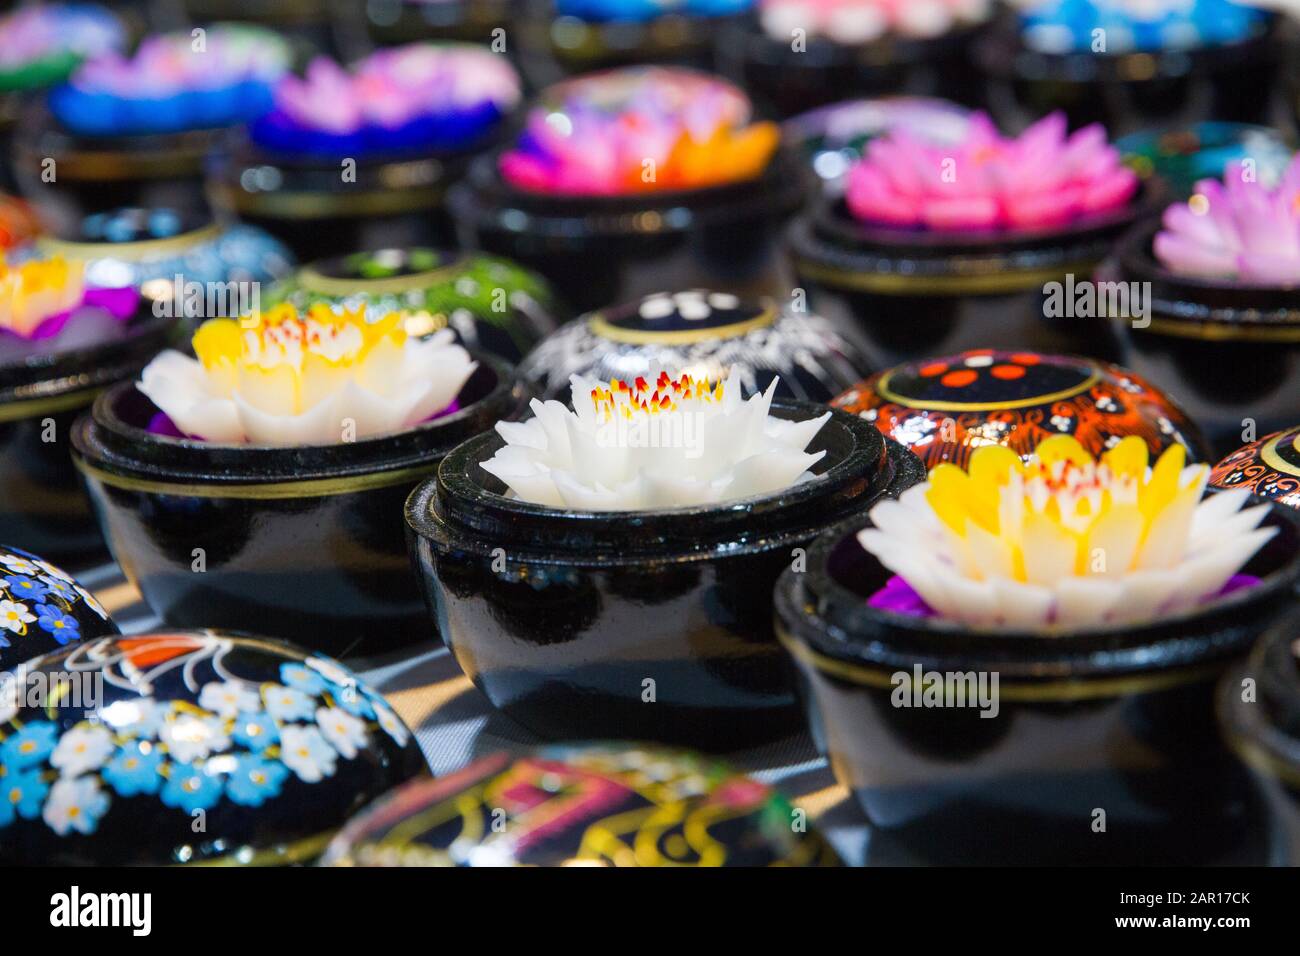 Thailand Handmade carved flower soaps in painted boxes, floral patterns, Chiang Mai Sunday night Market, Stock Photo